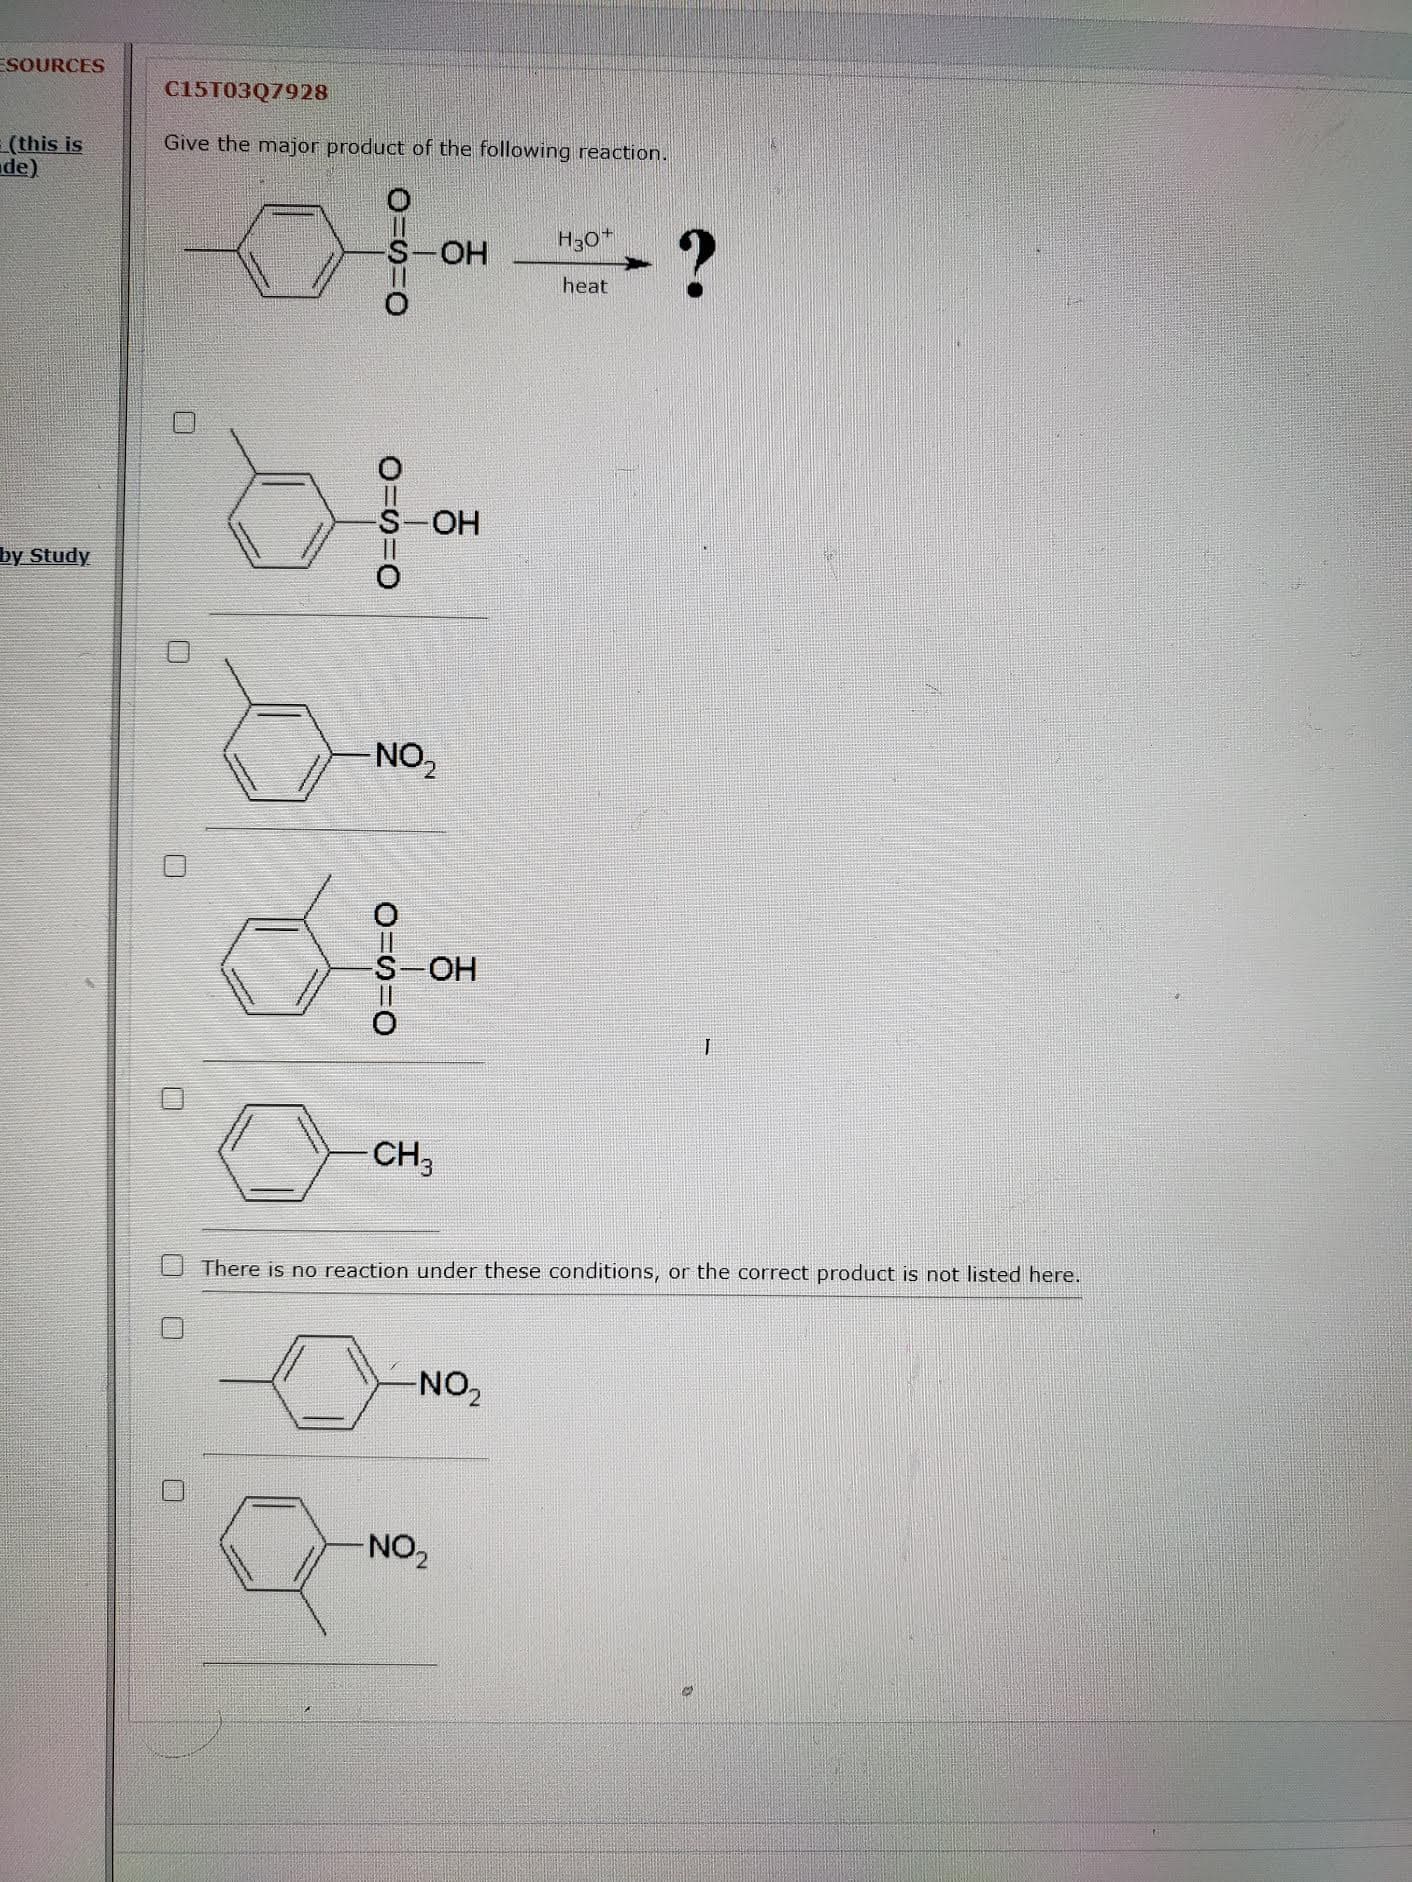 Give the major product of the following reaction.
S-OH
H30*
heat
HO-
NO2
S-OH
-CH
There is no reaction under these conditions, or the correct product is not listed here.
NO,
NO2
